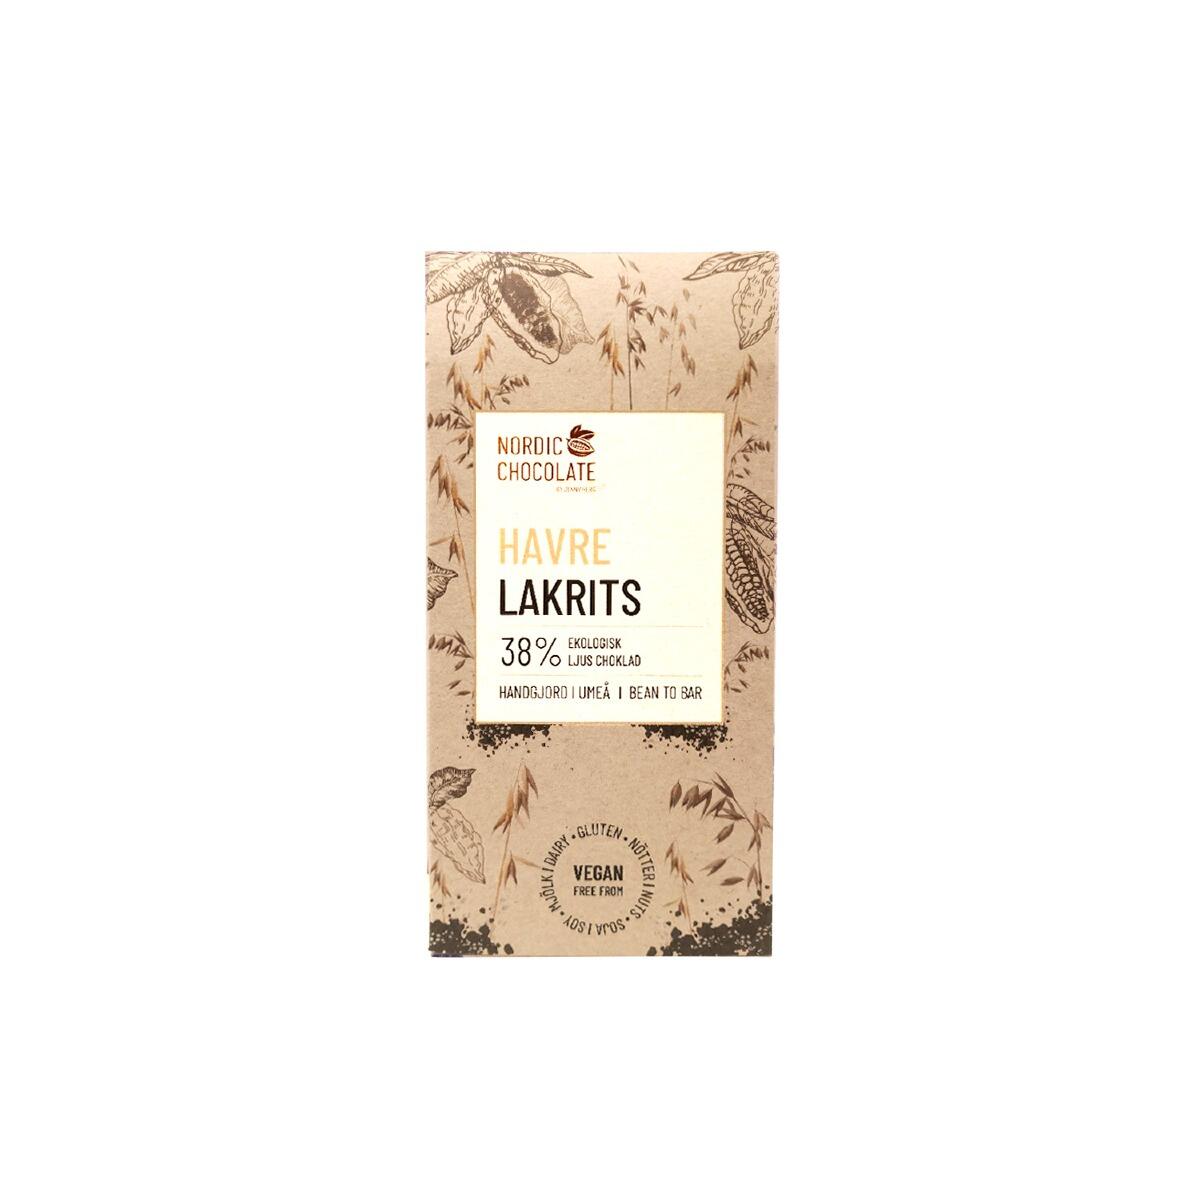 Nordic Chocolate's Oat Chocolate with Licorice'